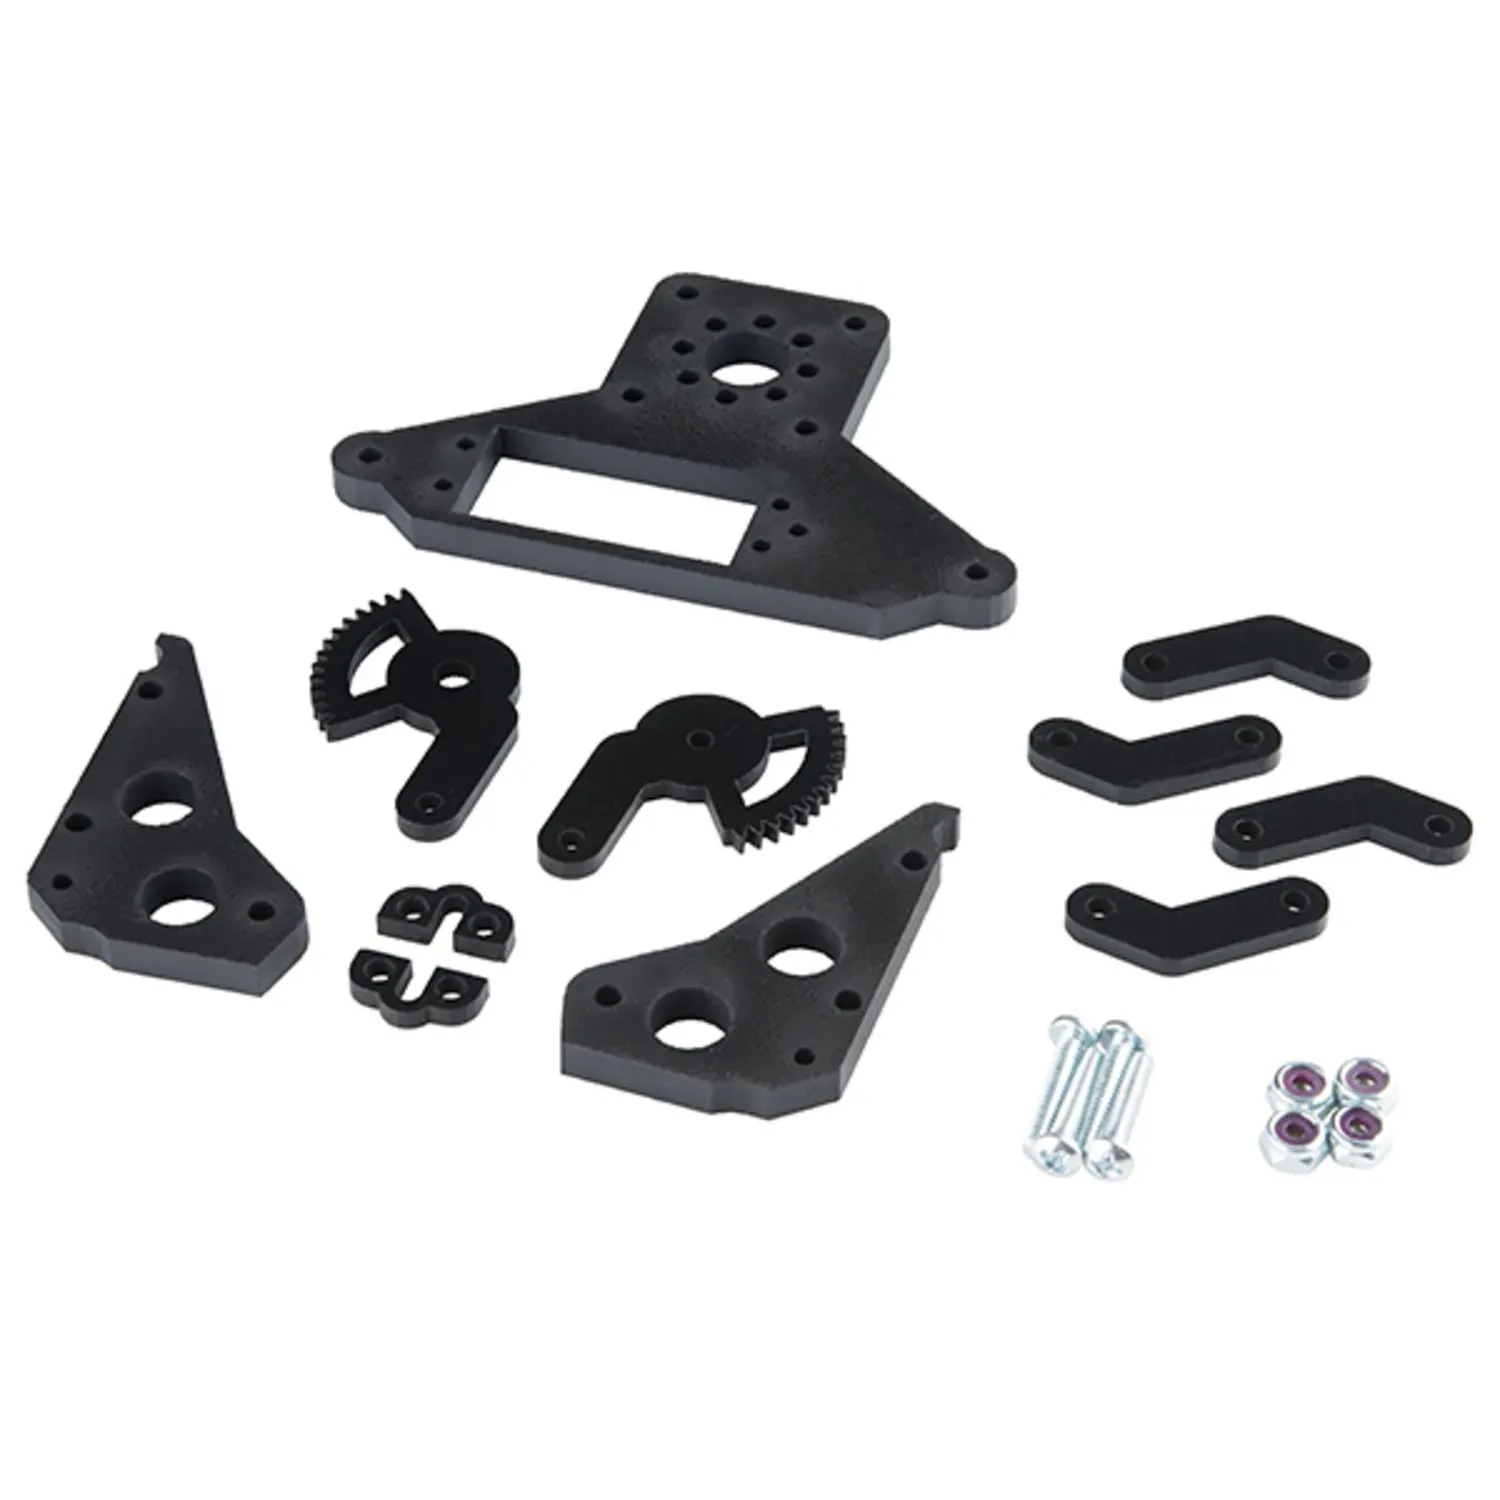 Photo of Parallel Gripper Kit A - Channel Mount